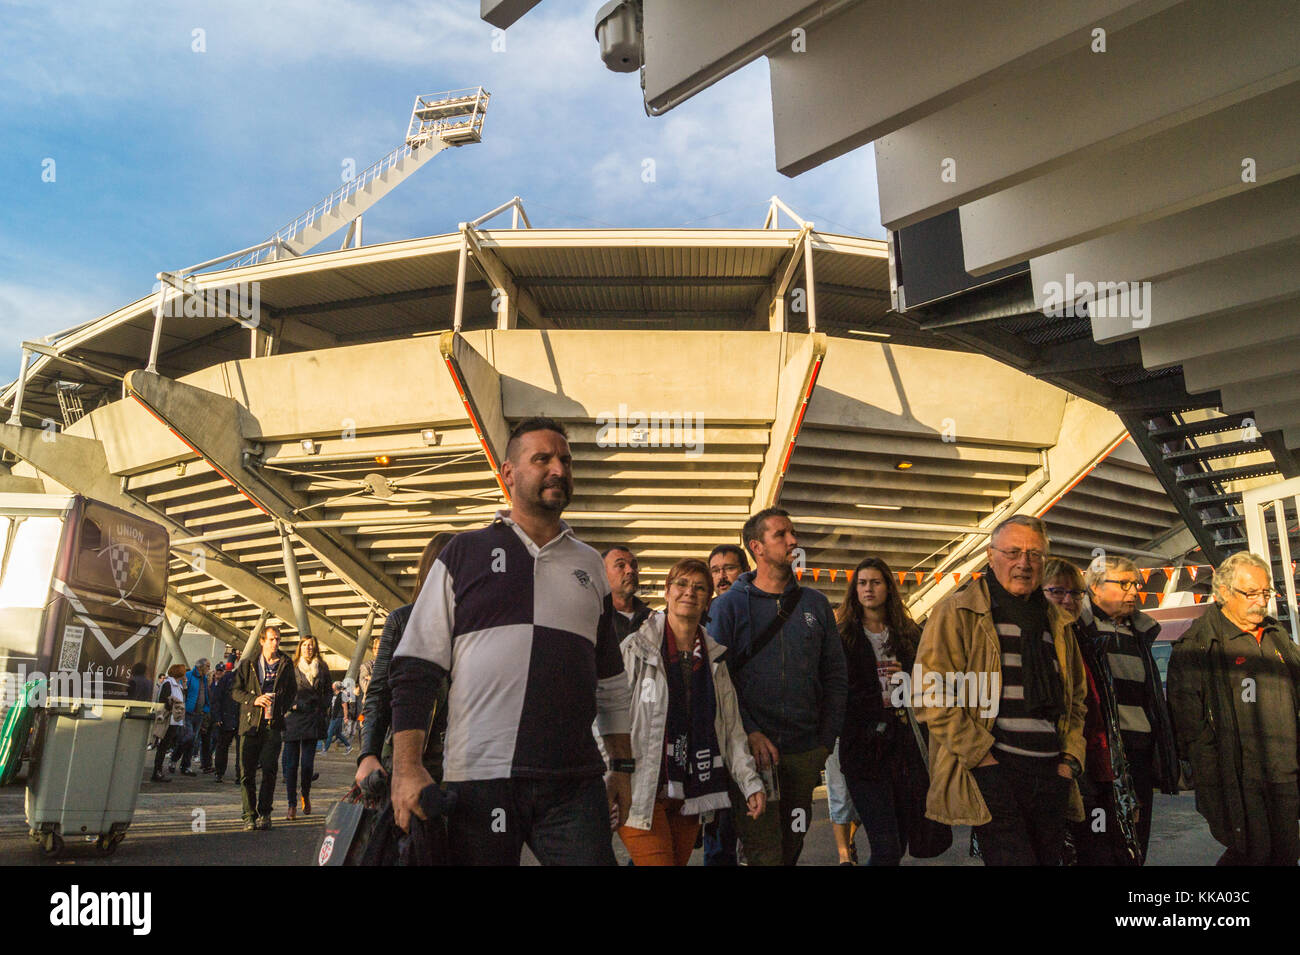 Spectators leaving a rugby match, Ernest Wallon stadium, home ground of Stade Toulousain rugby union team, Toulouse, Haute-Garonne, Occitanie, France Stock Photo